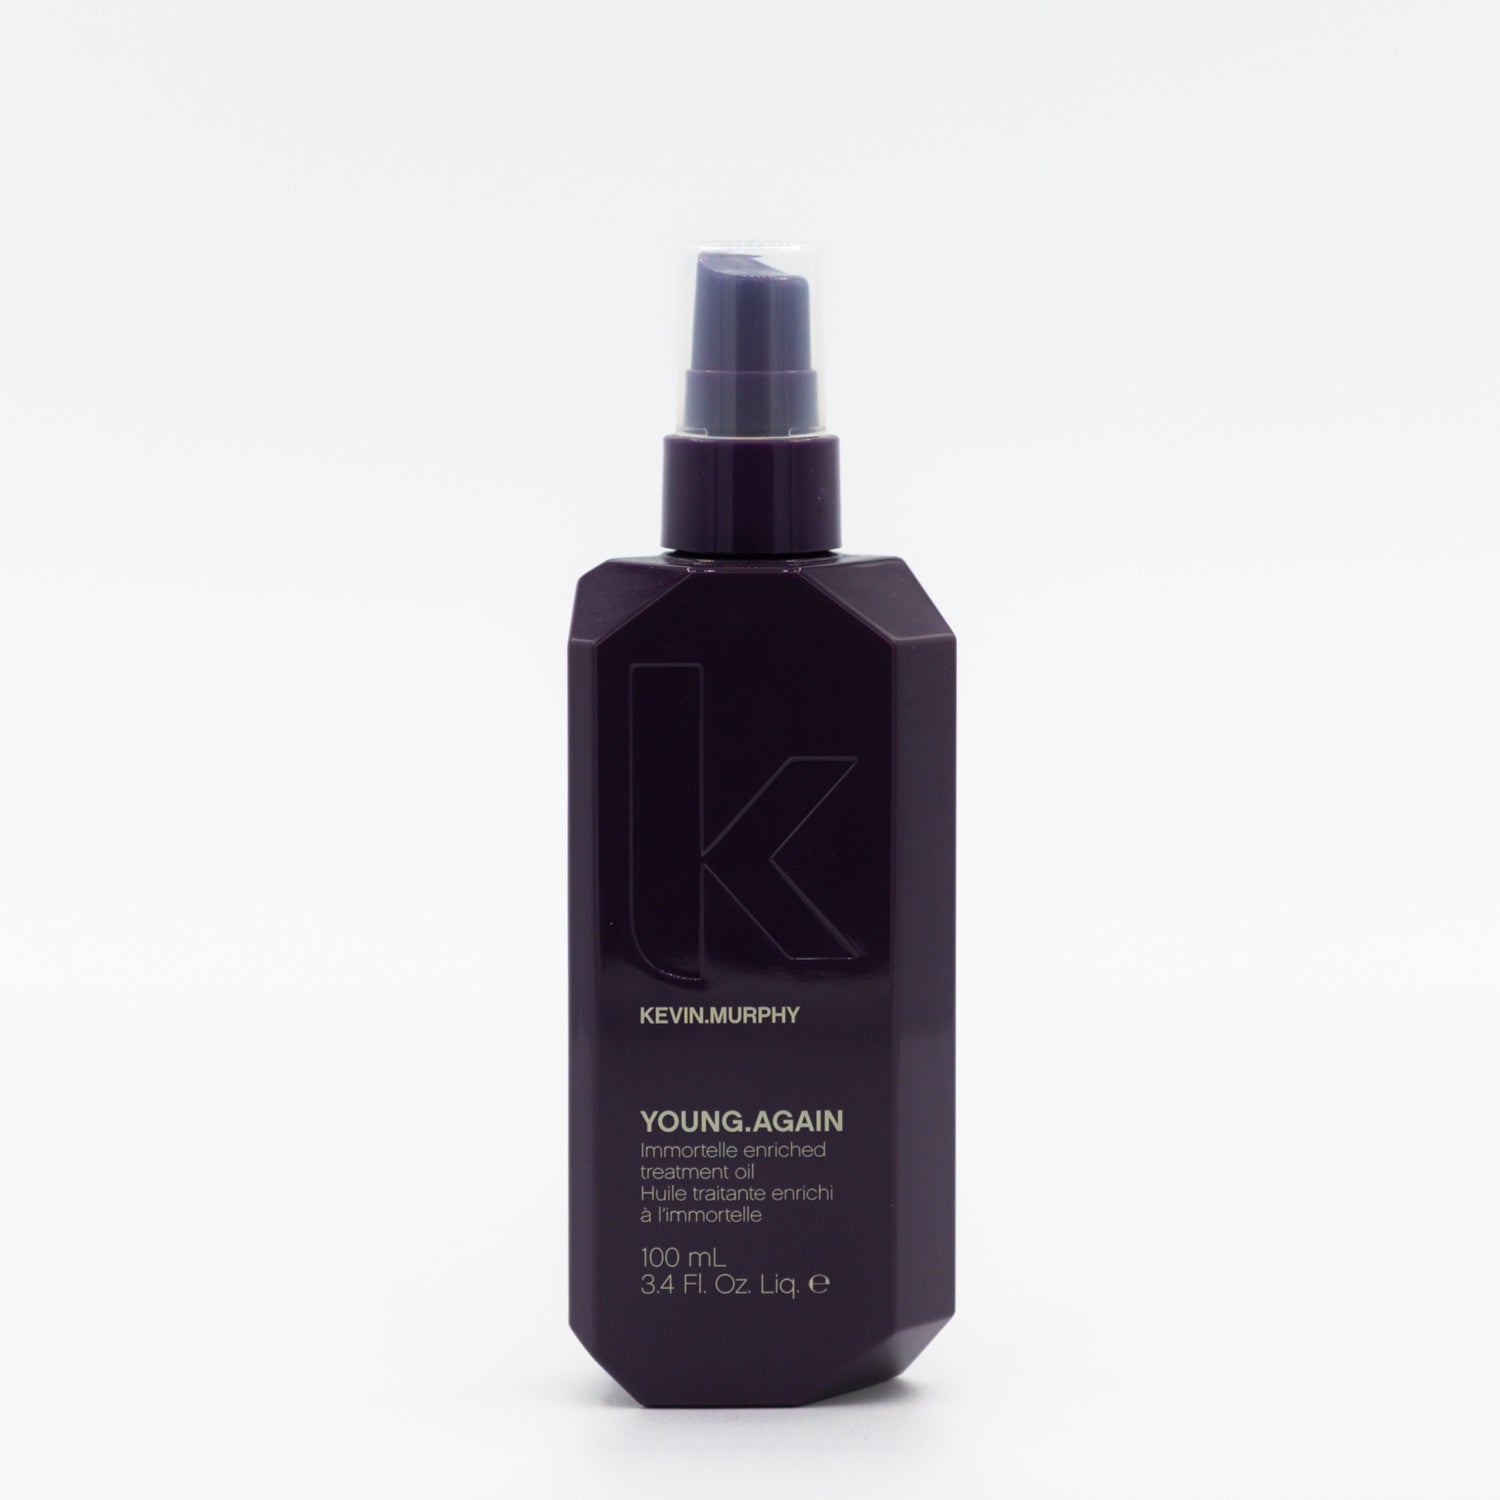 Kevin Murphy | Young.Again Oil